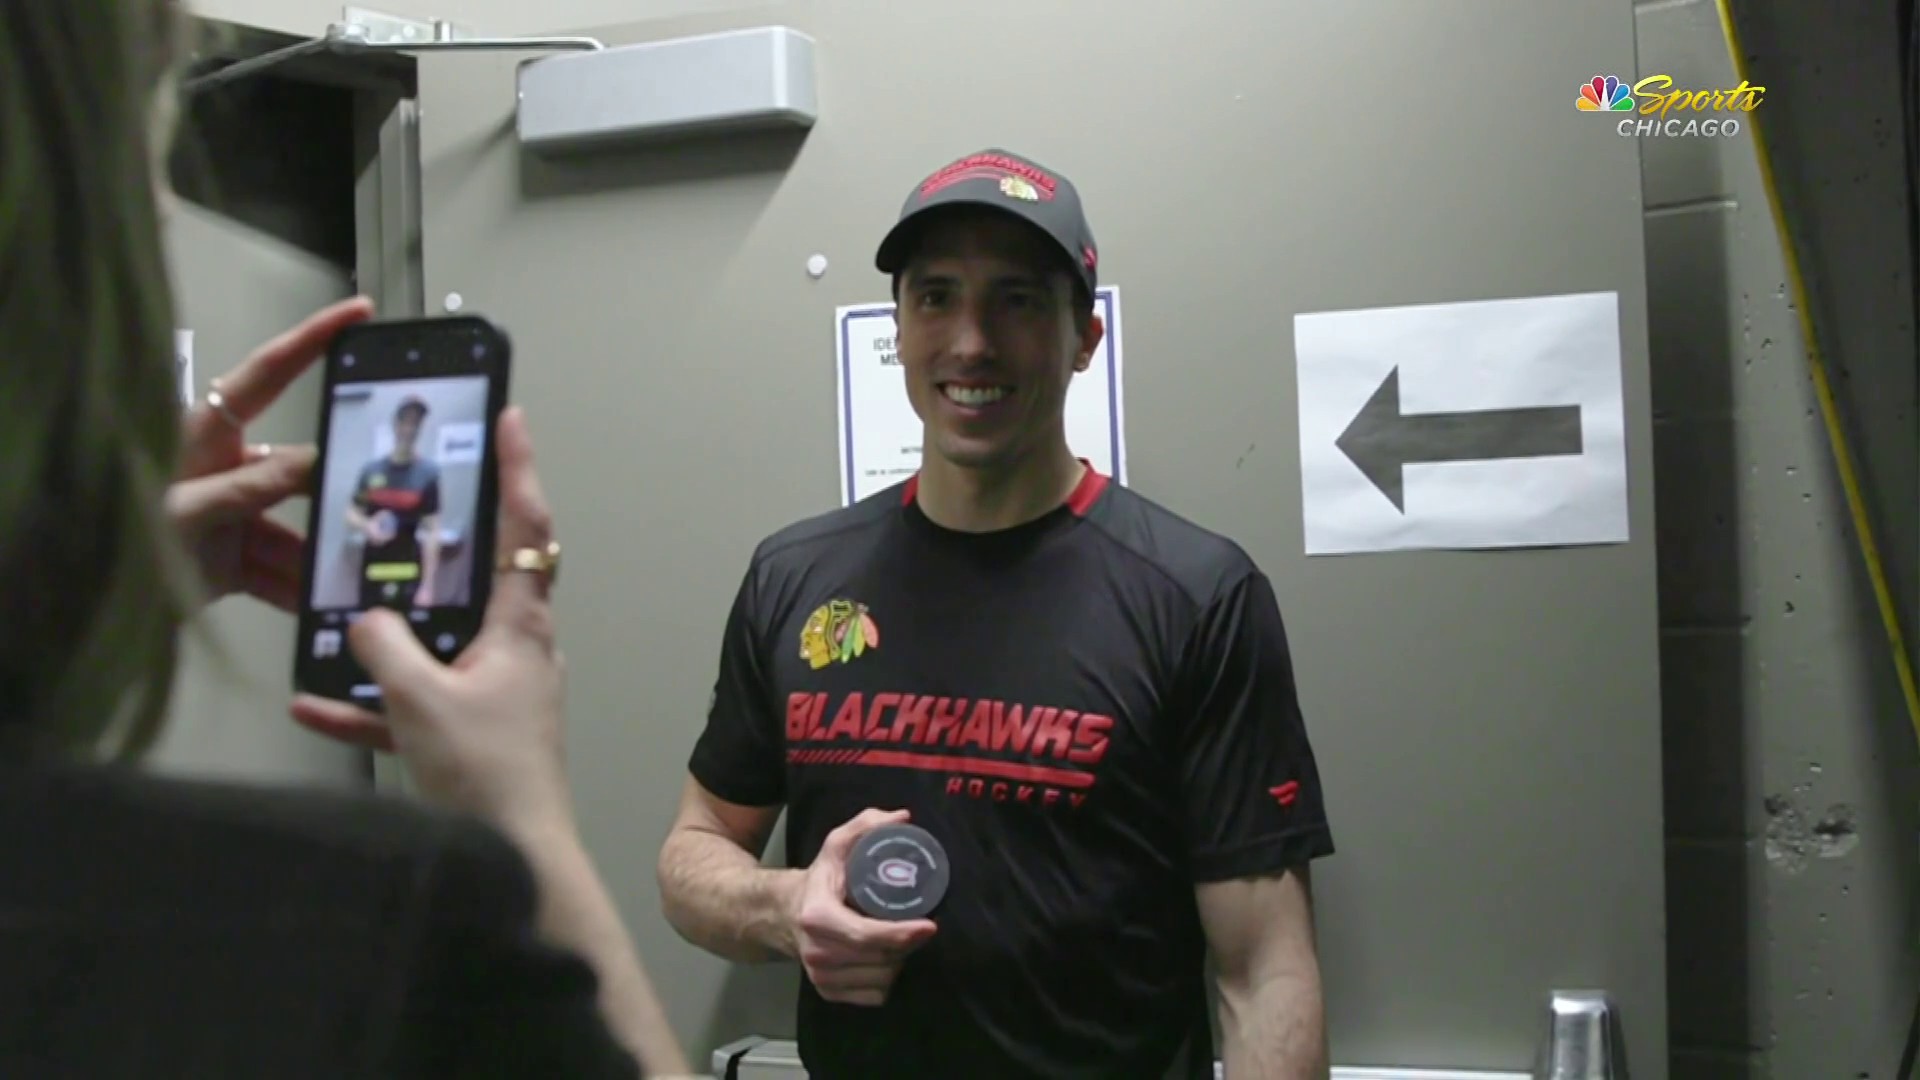 Blackhawks Store on X: Celebrate Marc-Andre's 500th NHL win with